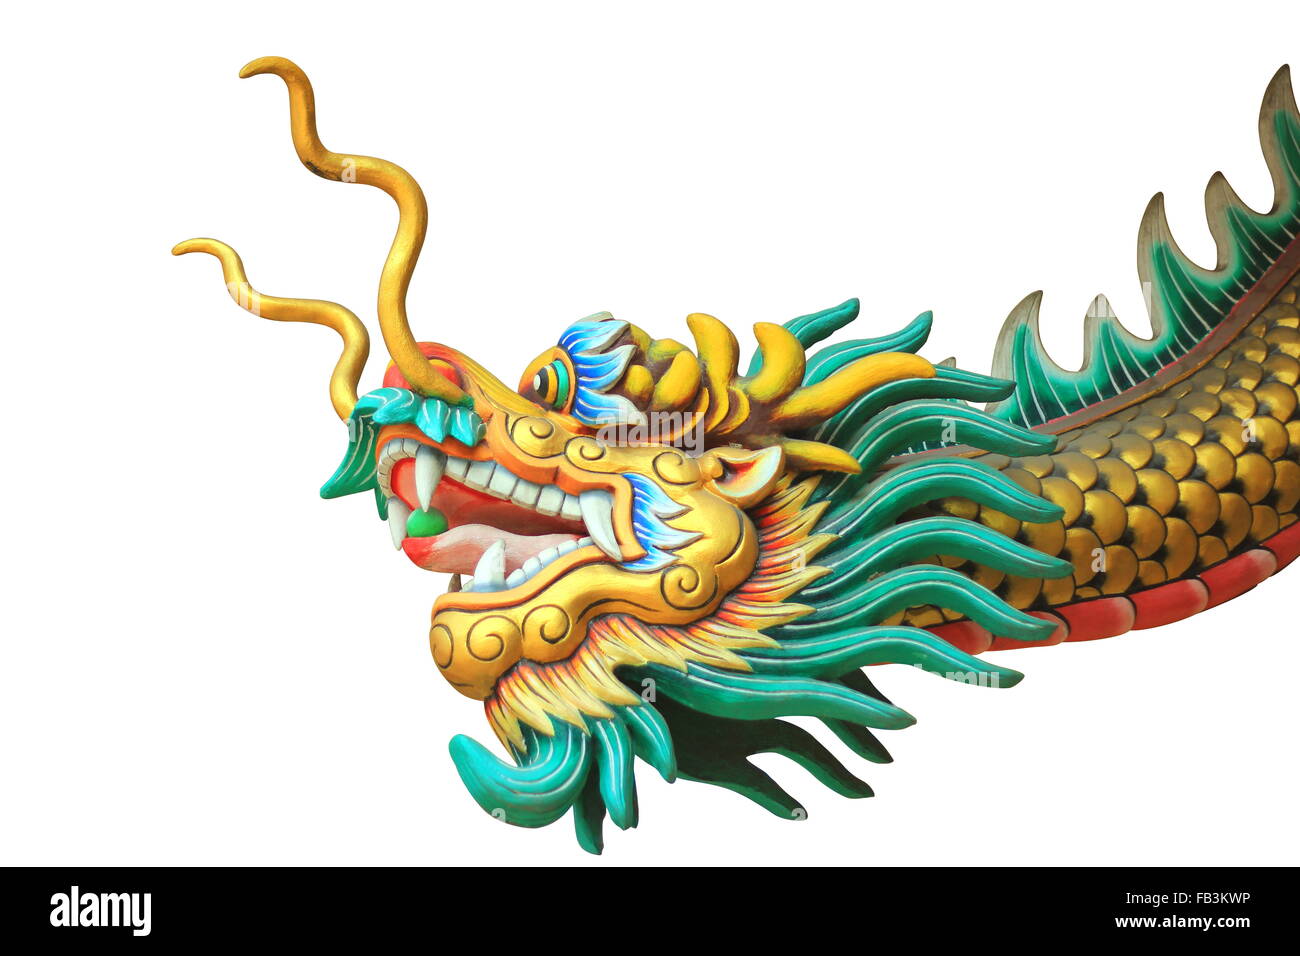 china dragon head and body statue isolated on white background Stock Photo